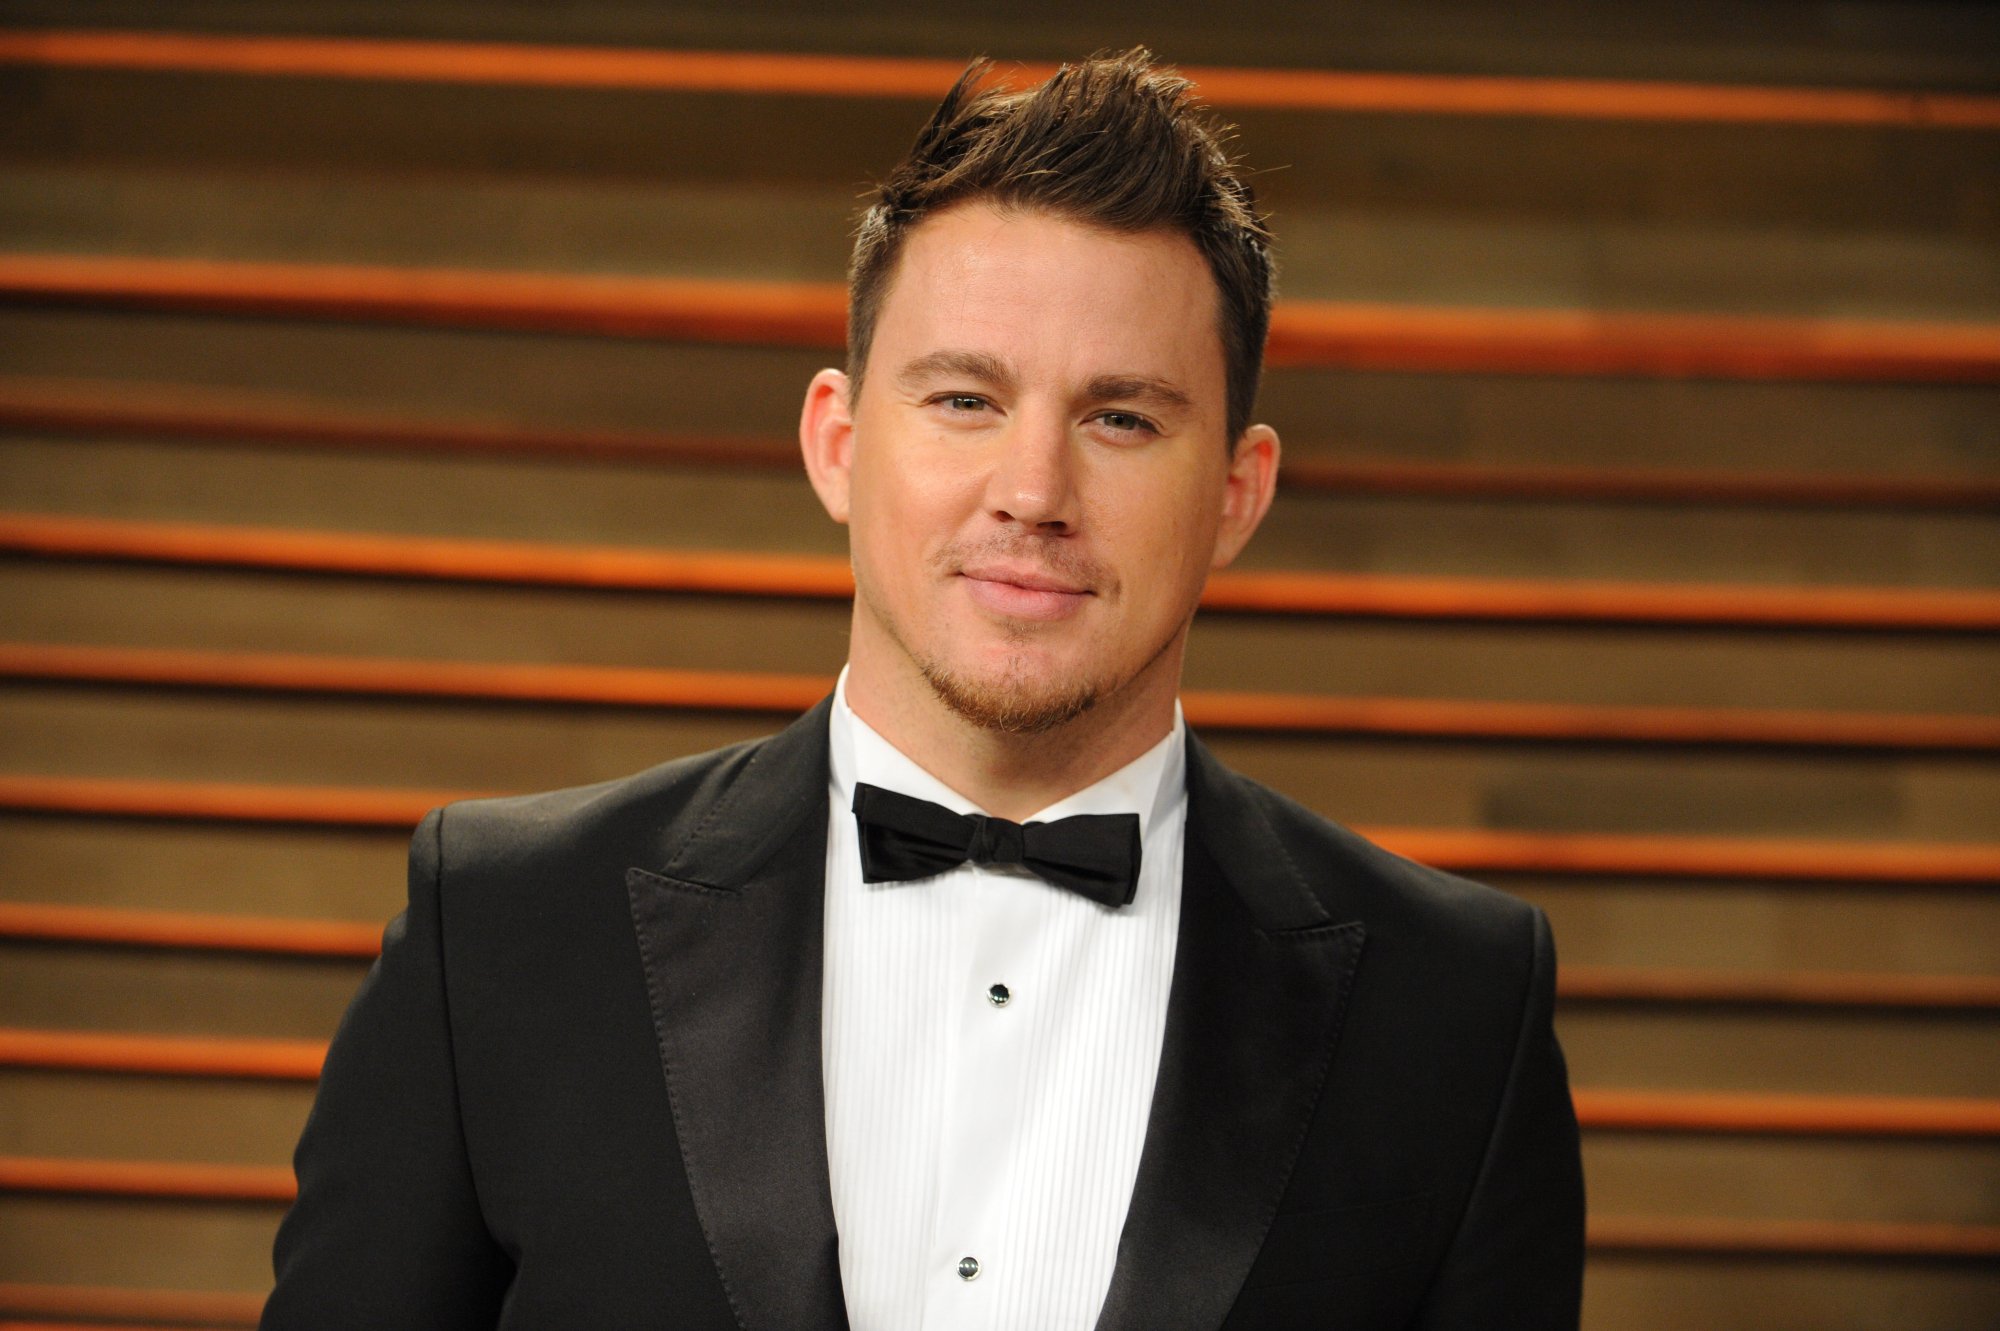 'The Eagle' star Channing Tatum, who nearly had his penis burned off, wearing a black and white tuxedo